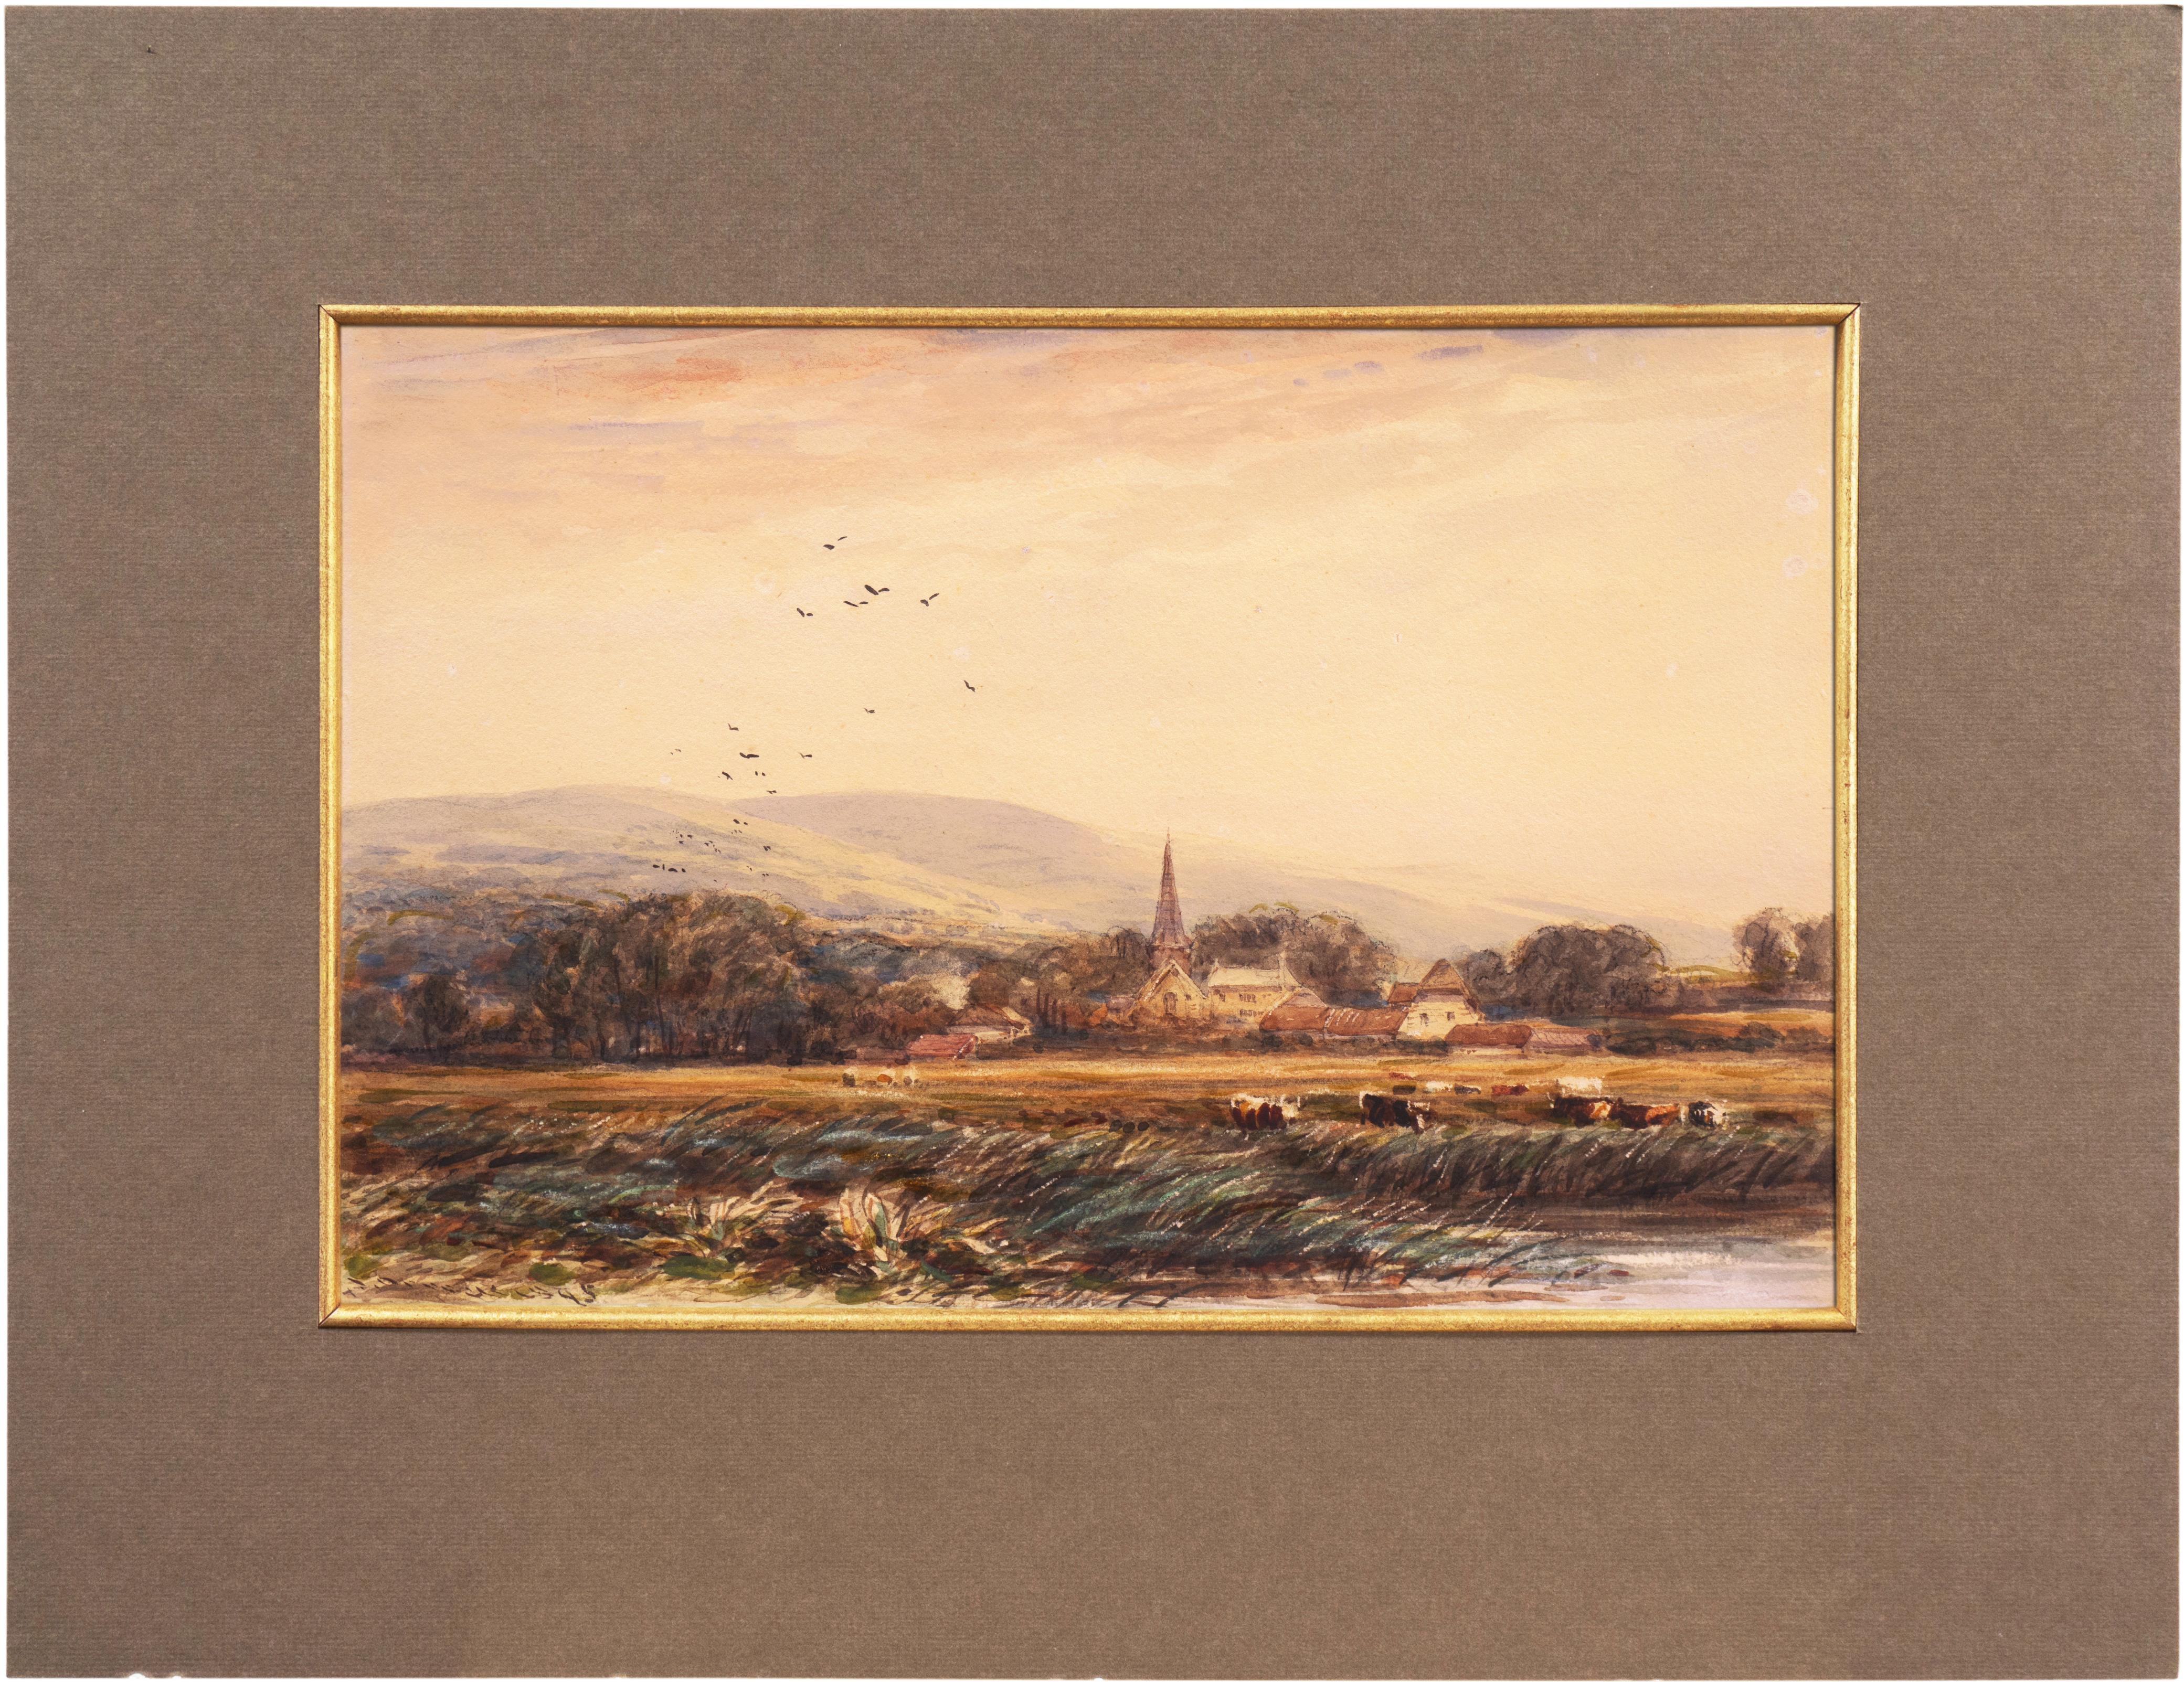 'Village with Church Spire', English mid-19th Century Watercolor, David Cox - Art by James Orrock